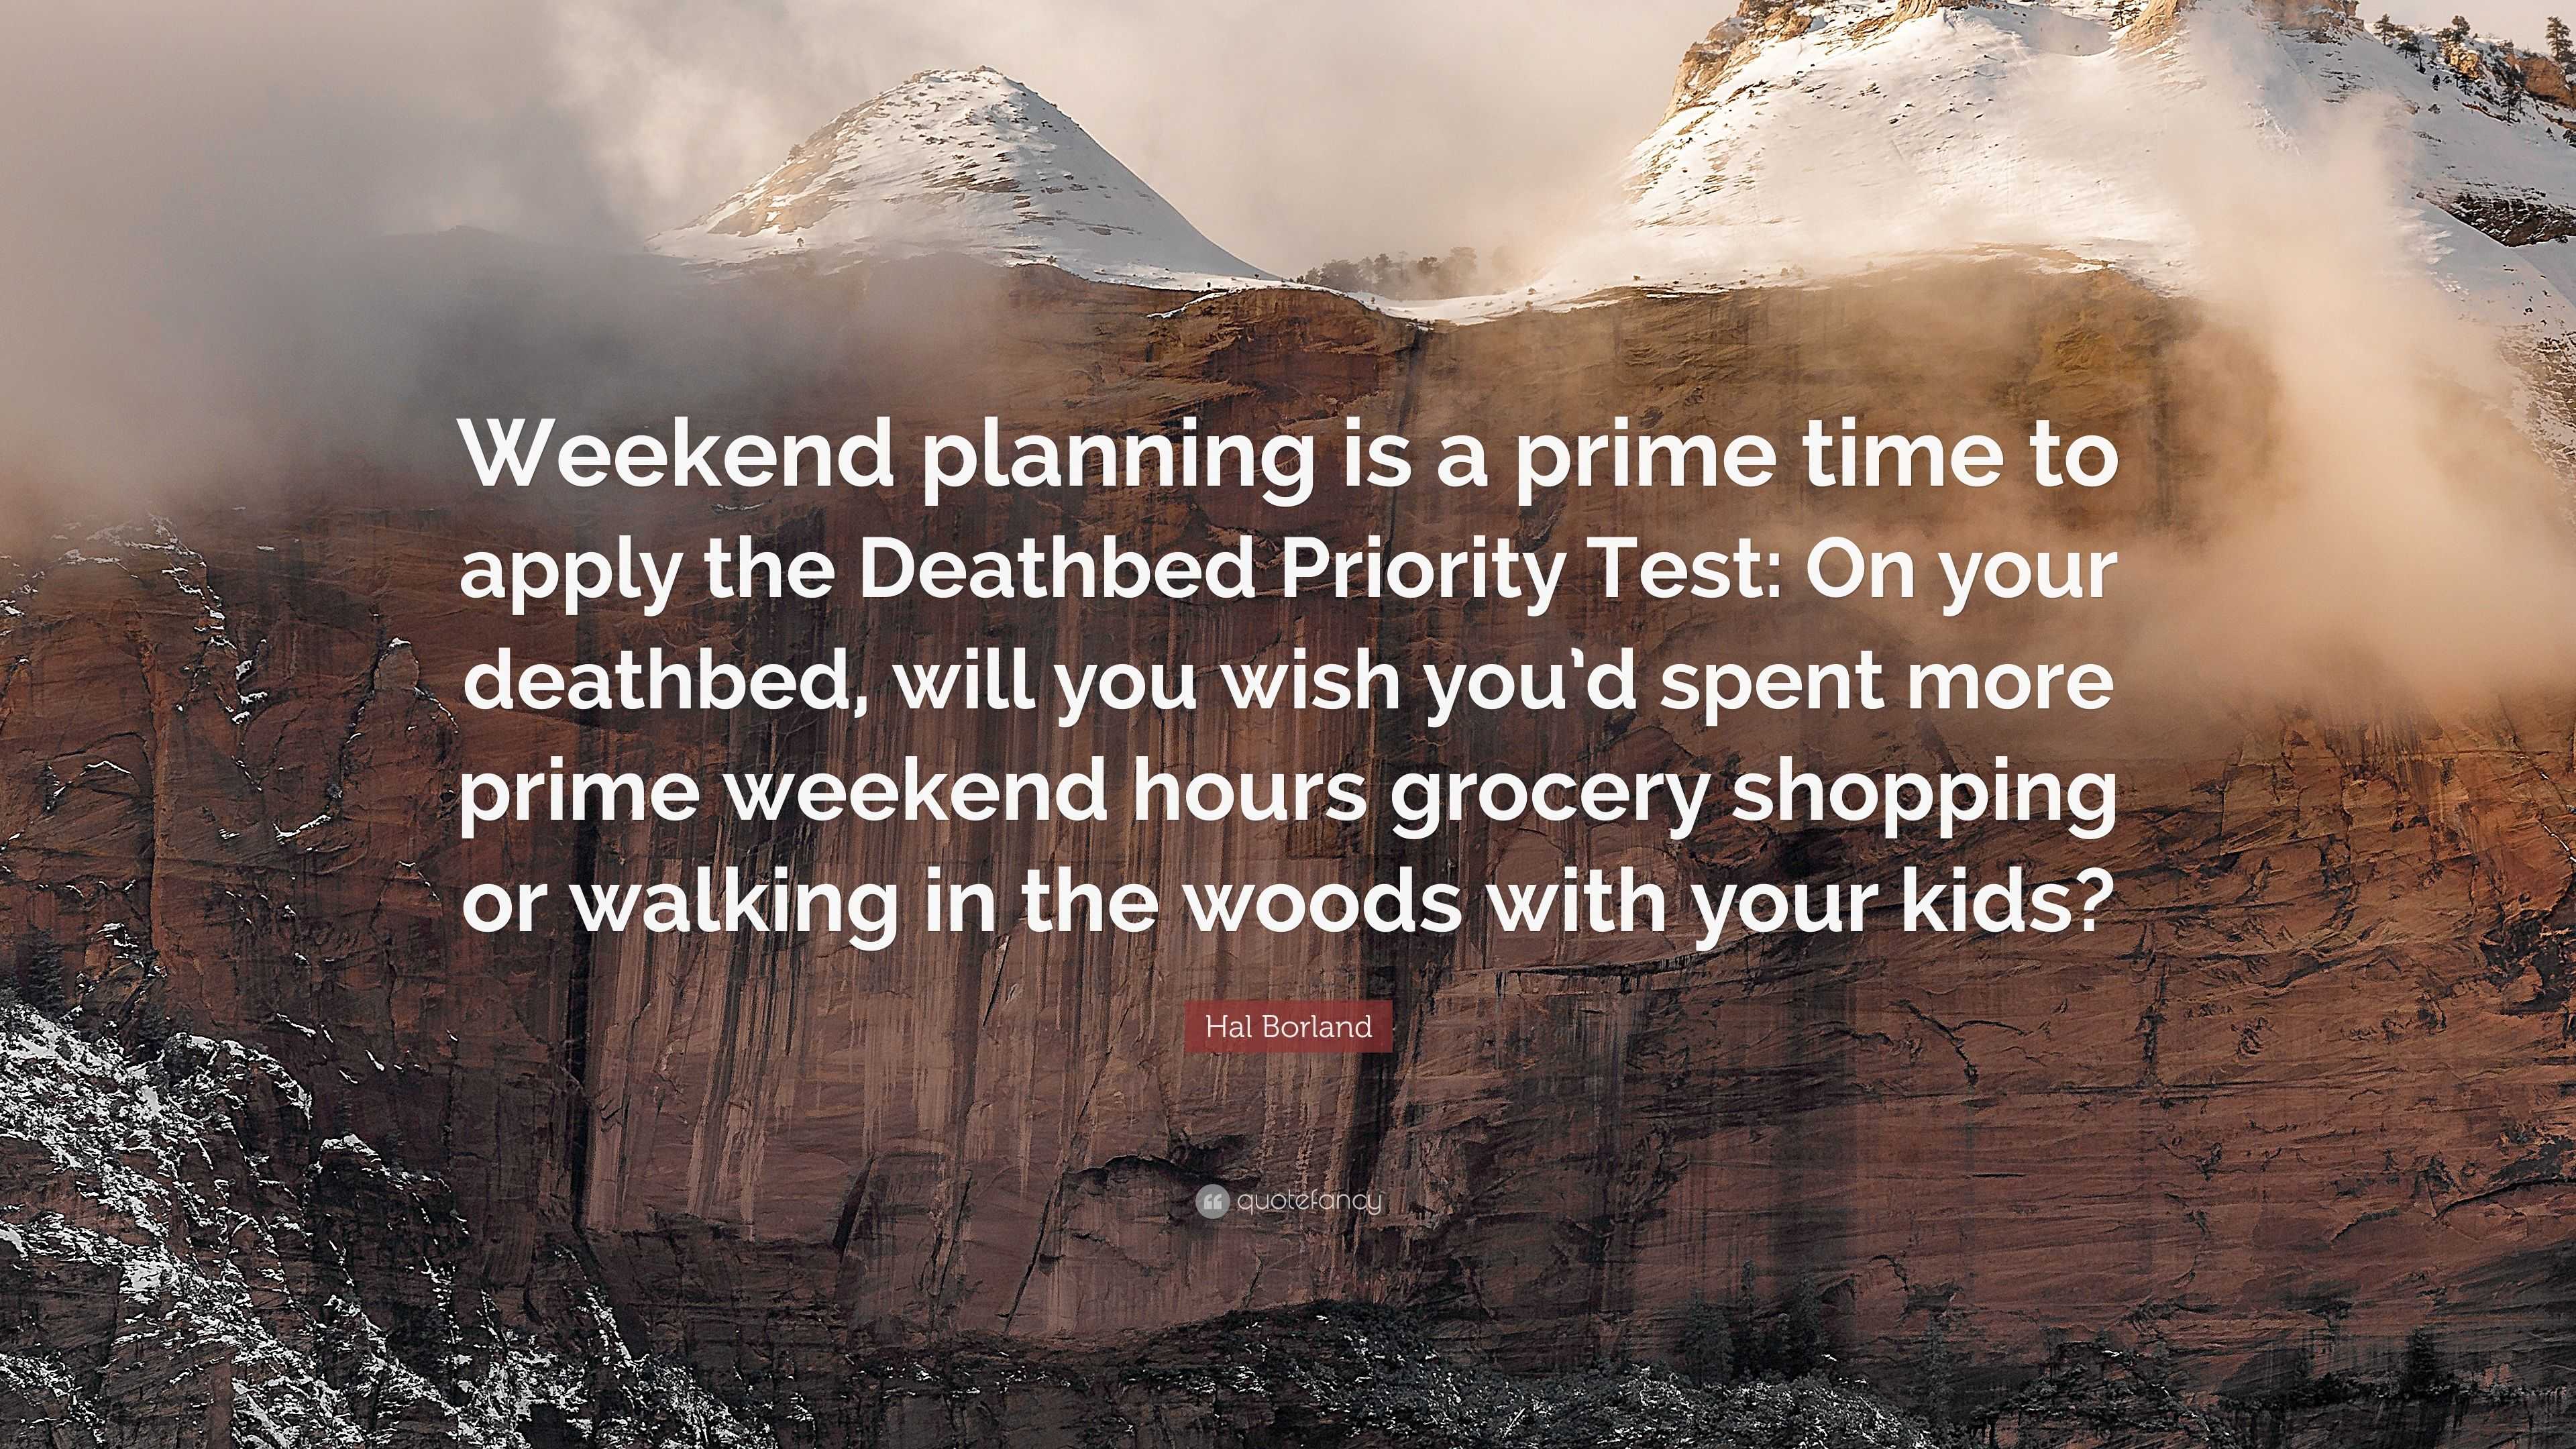 Hal Borland Quote: “Weekend planning is a prime time to apply the